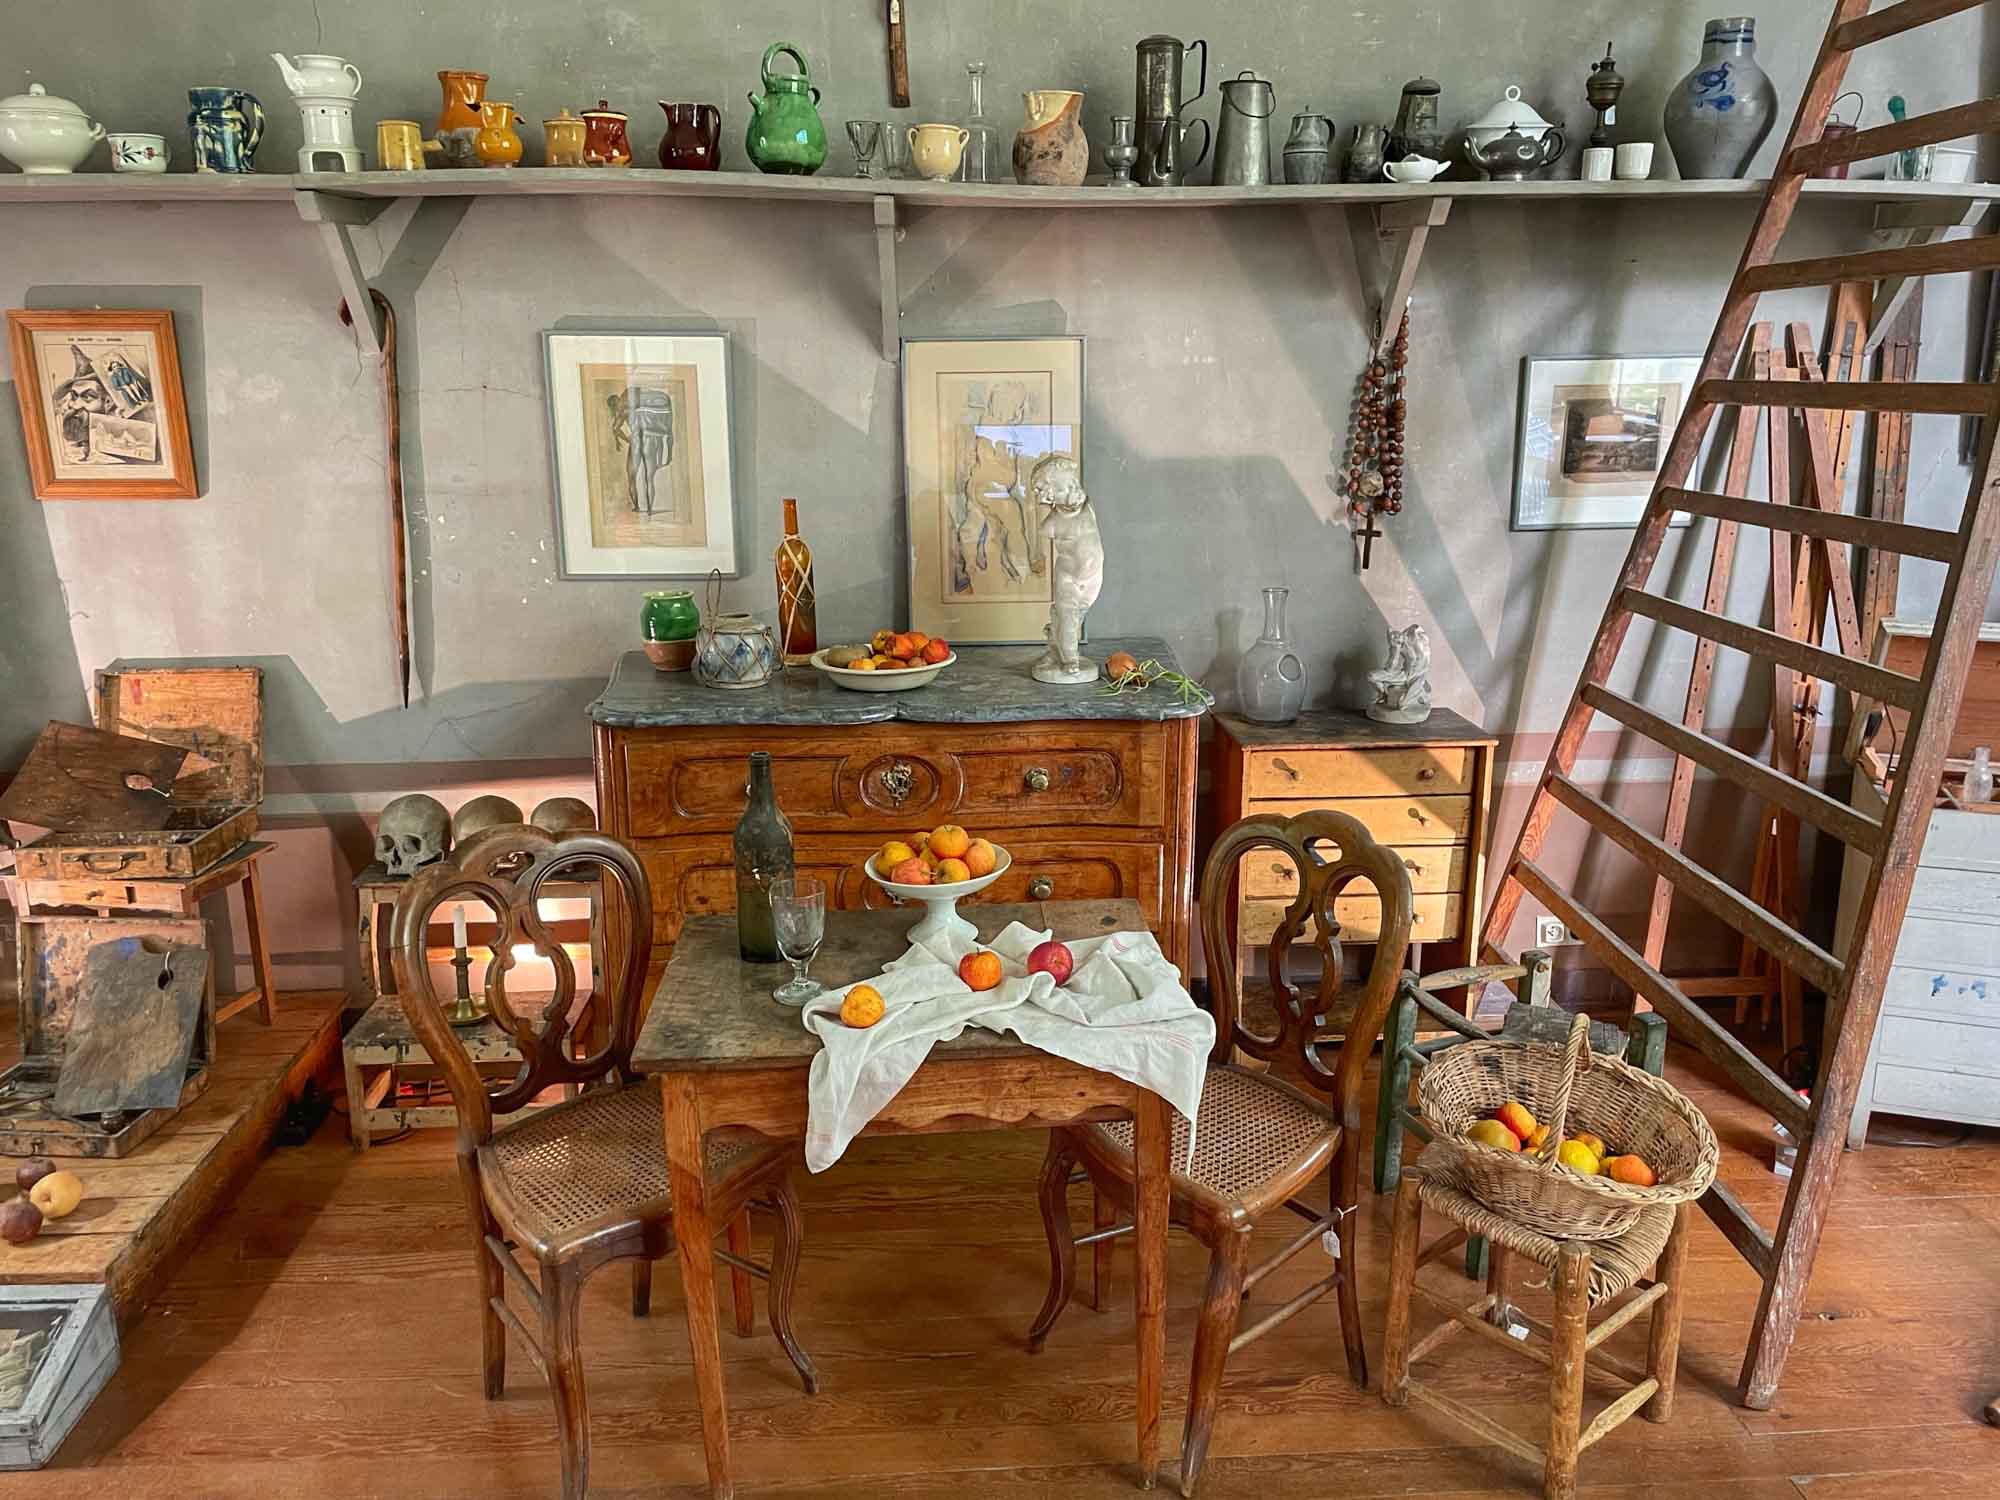 Artist's studio with table and chairs, dresser, and fruit